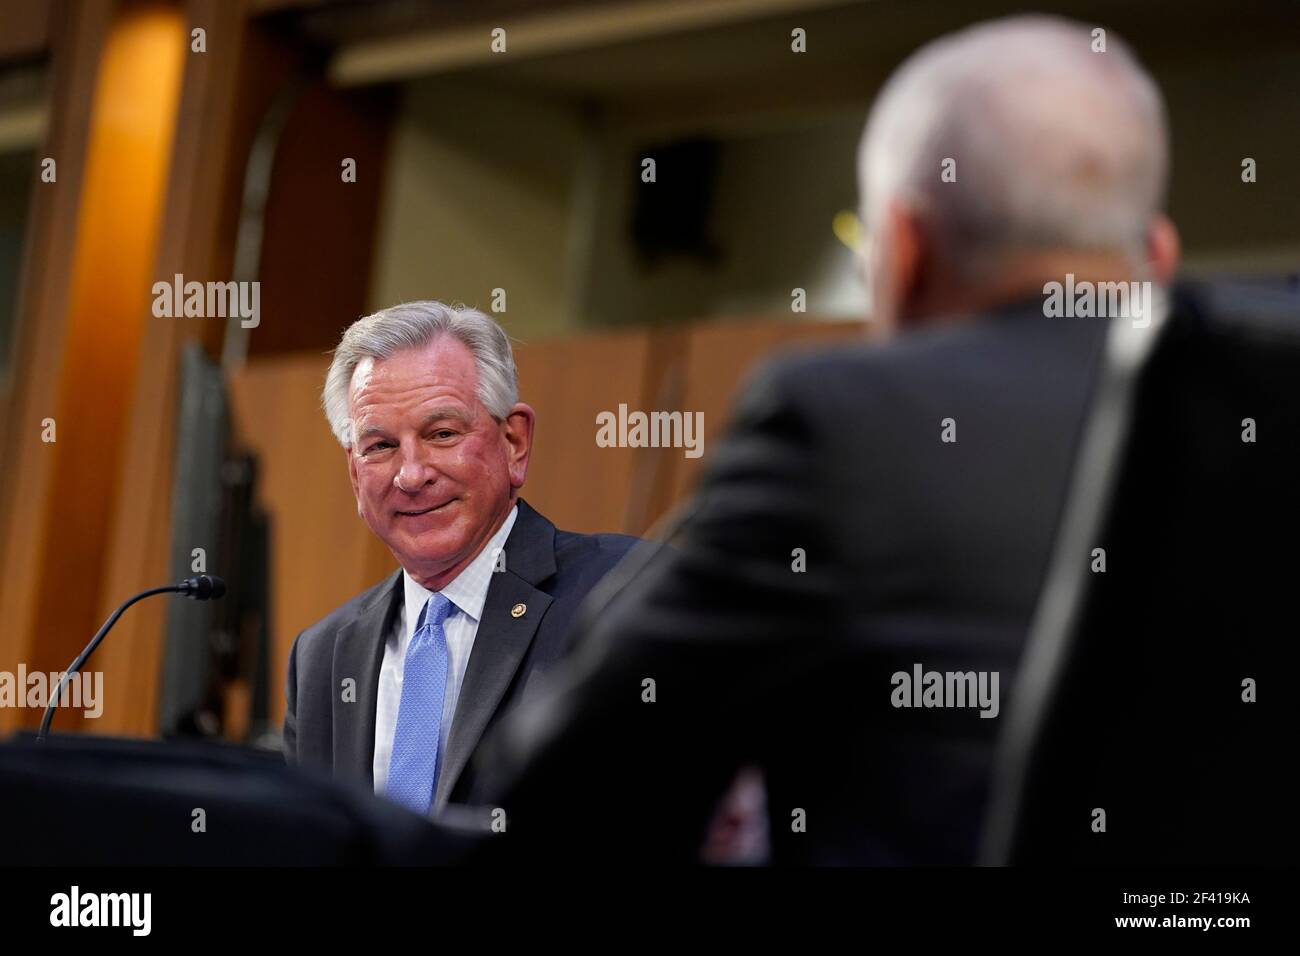 Washington, USA. 18th Mar, 2021. Sen. Tommy Tuberville, R-Ala., speaks during a Senate Health, Education, Labor and Pensions Committee hearing on the federal coronavirus response on Capitol Hill in Washington, Thursday, March 18, 2021. (Photo by Susan Walsh/Pool/Sipa USA) Credit: Sipa USA/Alamy Live News Stock Photo